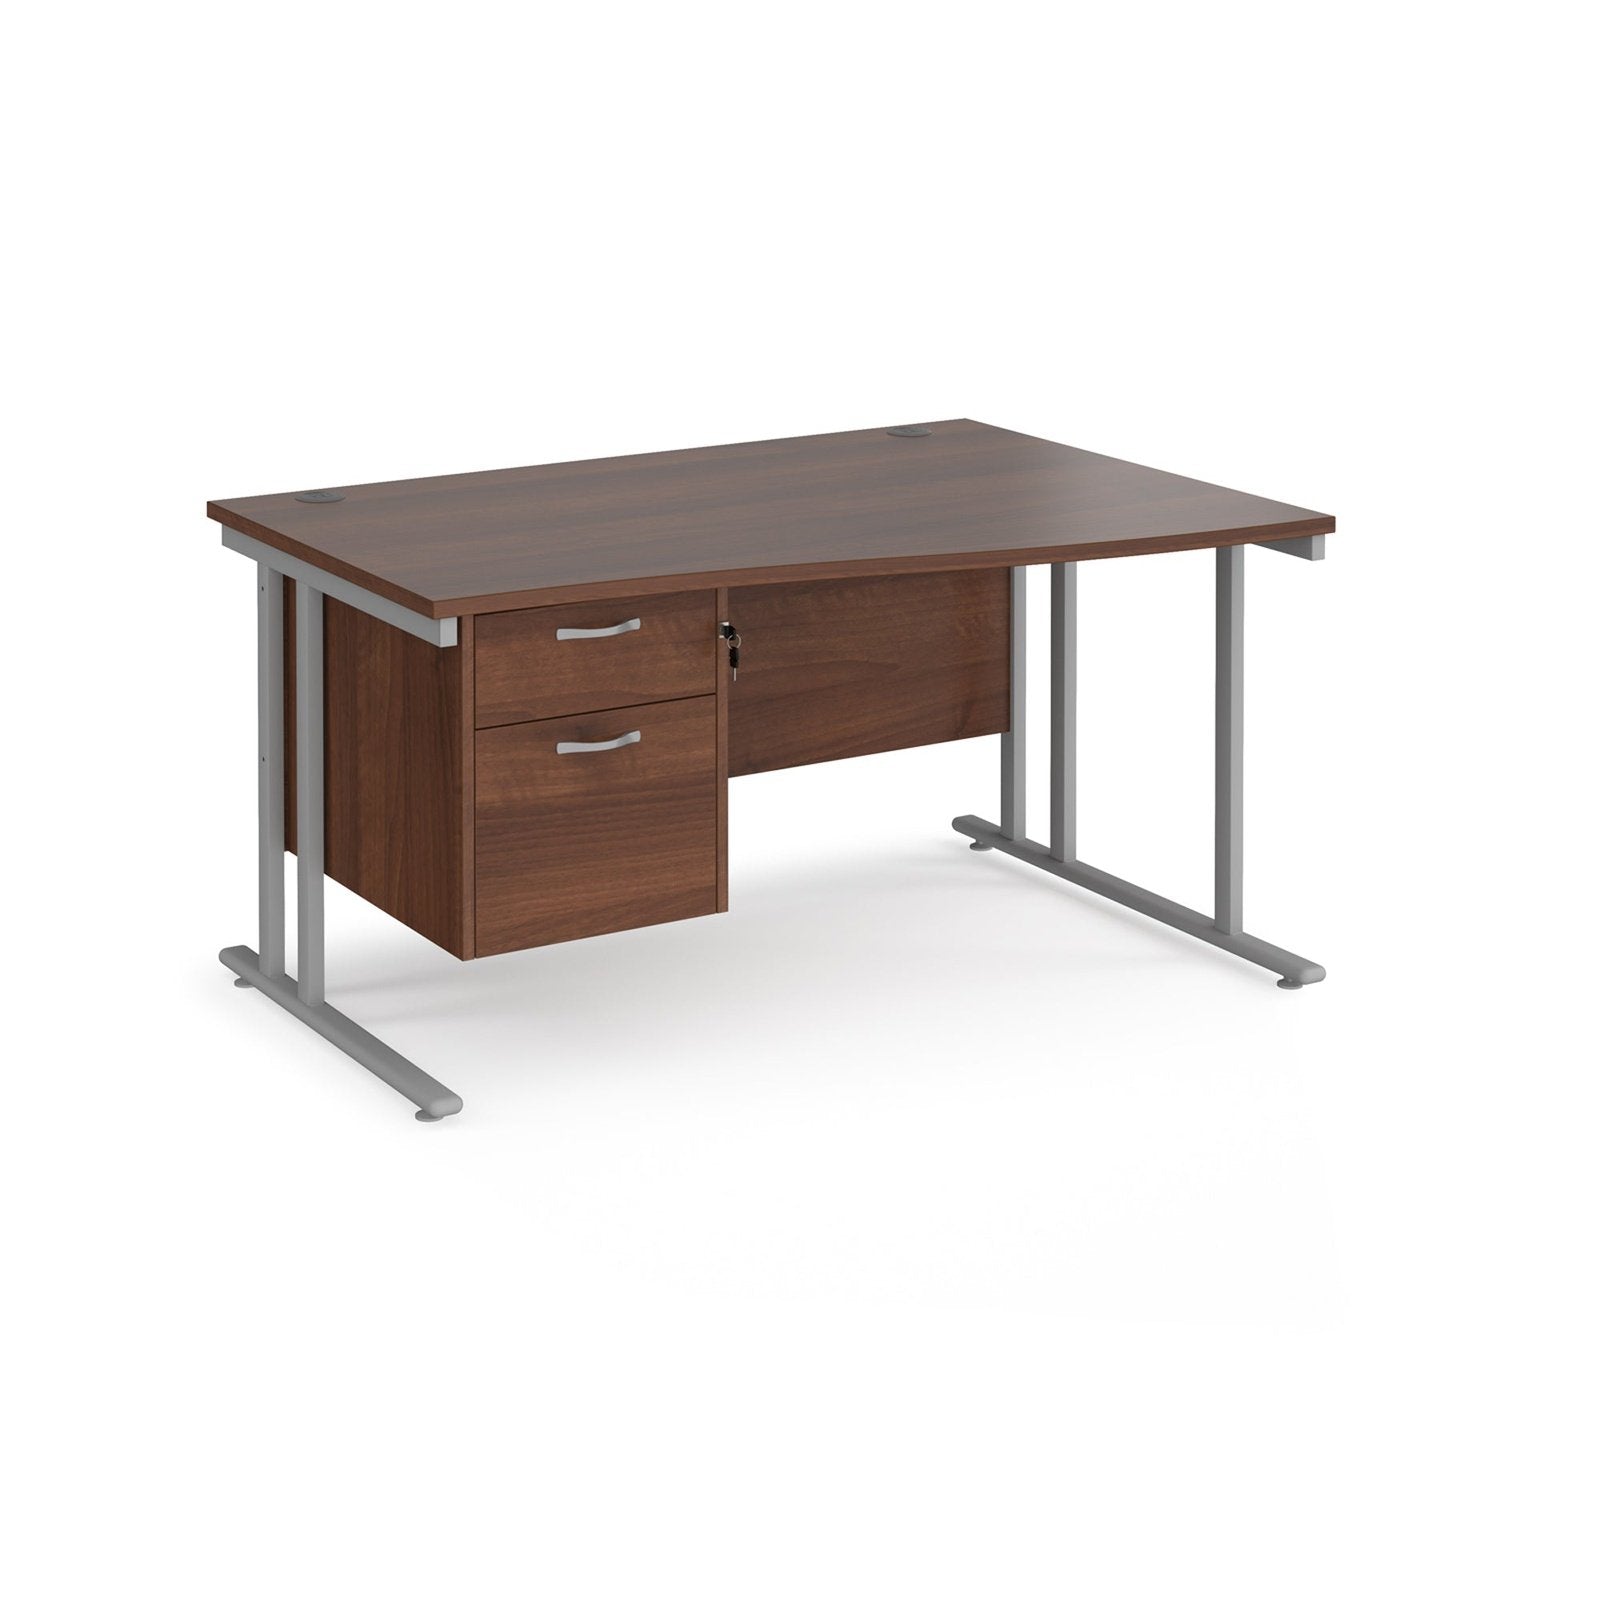 Maestro 25 cantilever leg right hand with 2 drawer pedestal - Office Products Online